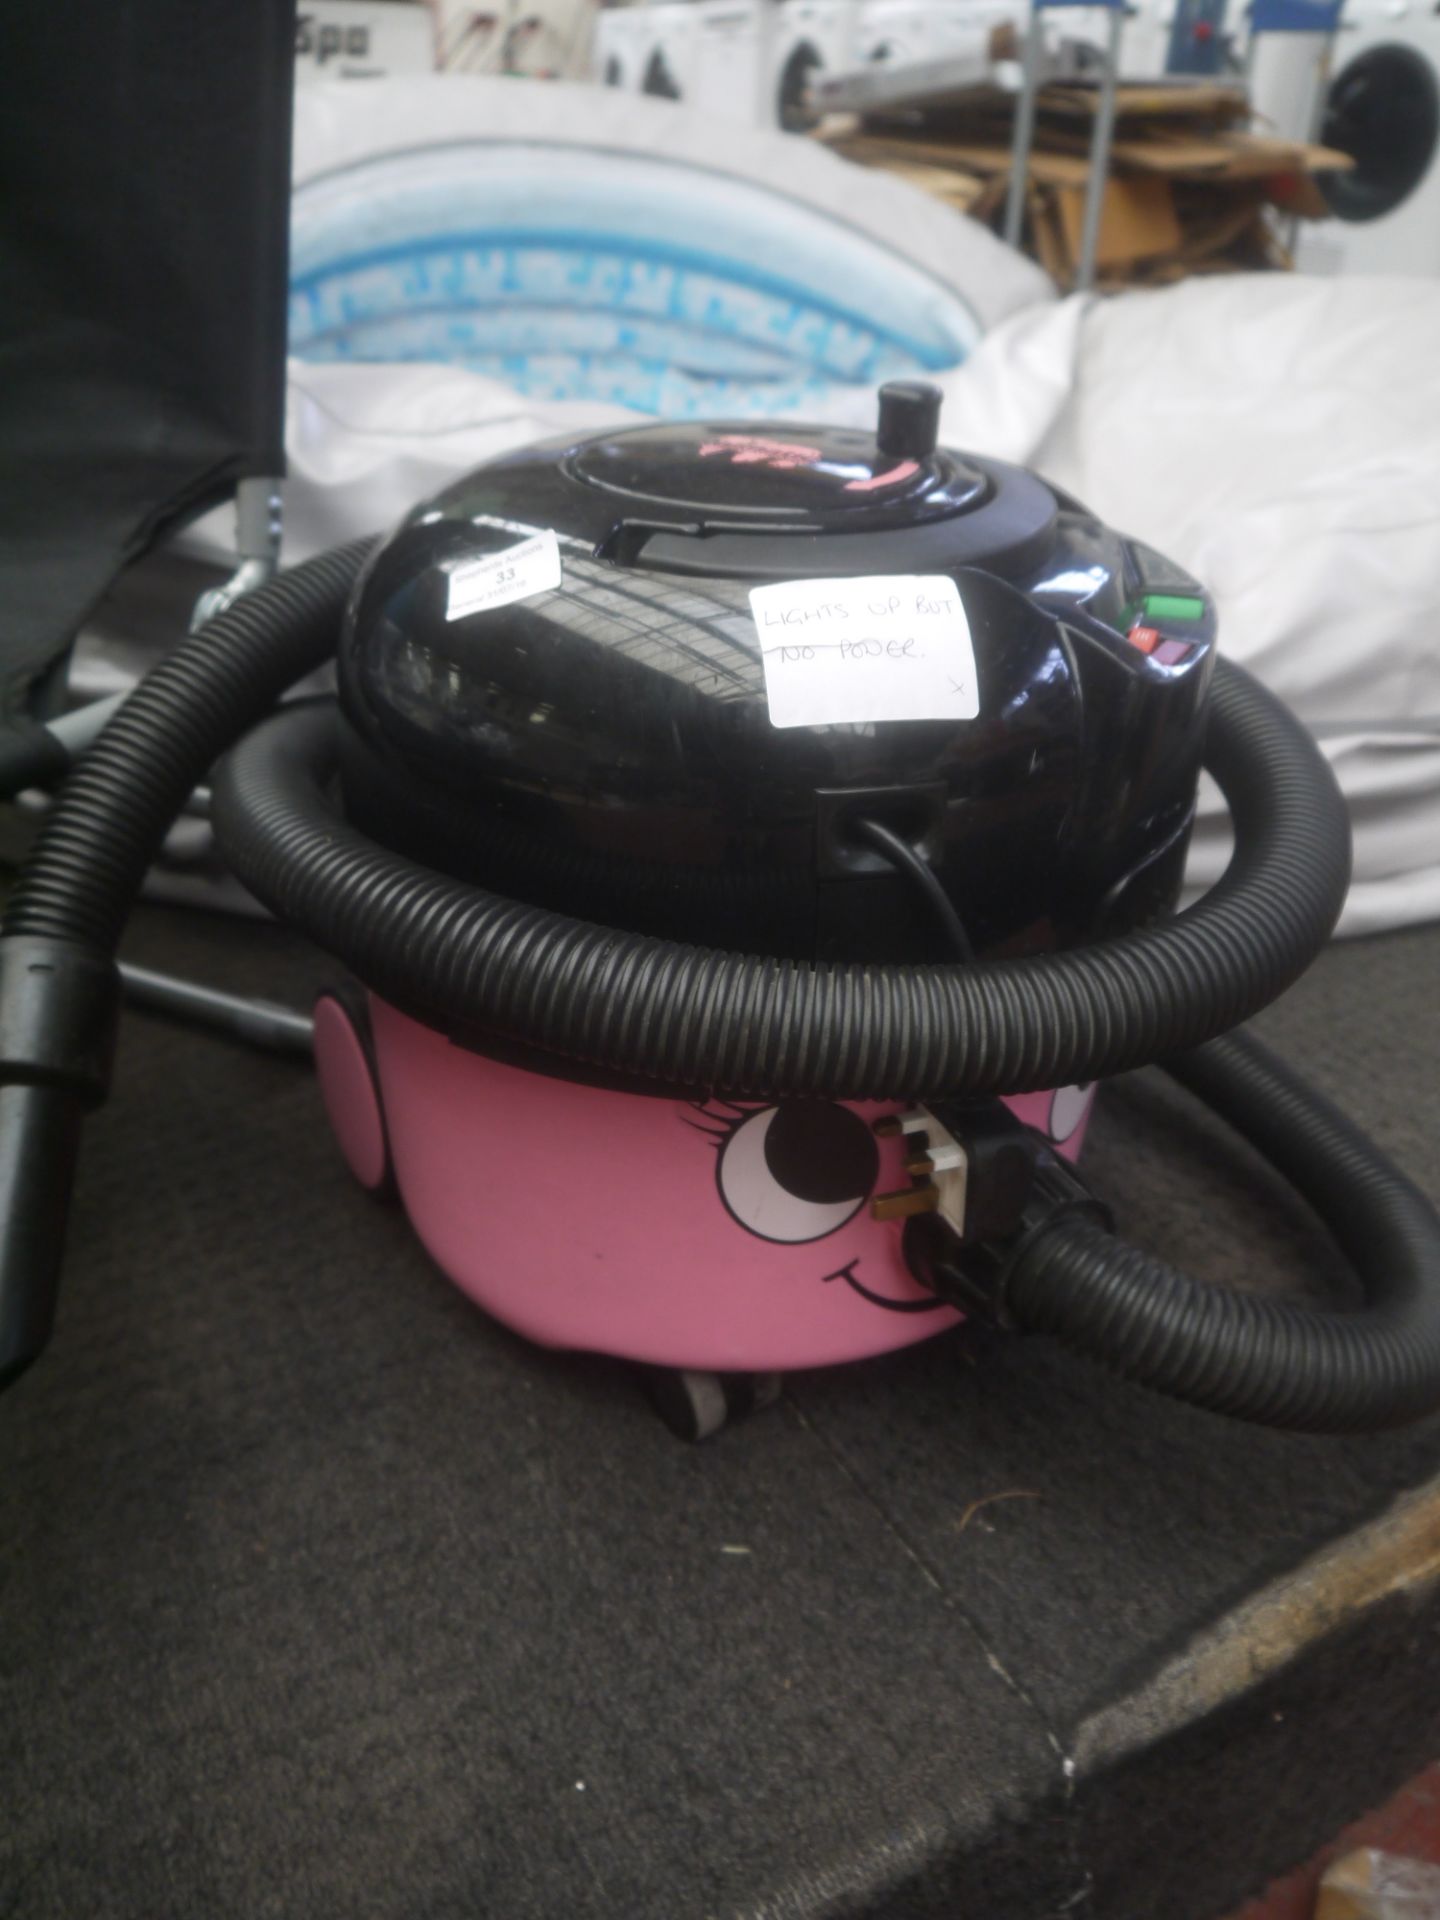 Numatic Hetty Cylinder Vacuum Cleaner. Lights up but no power.